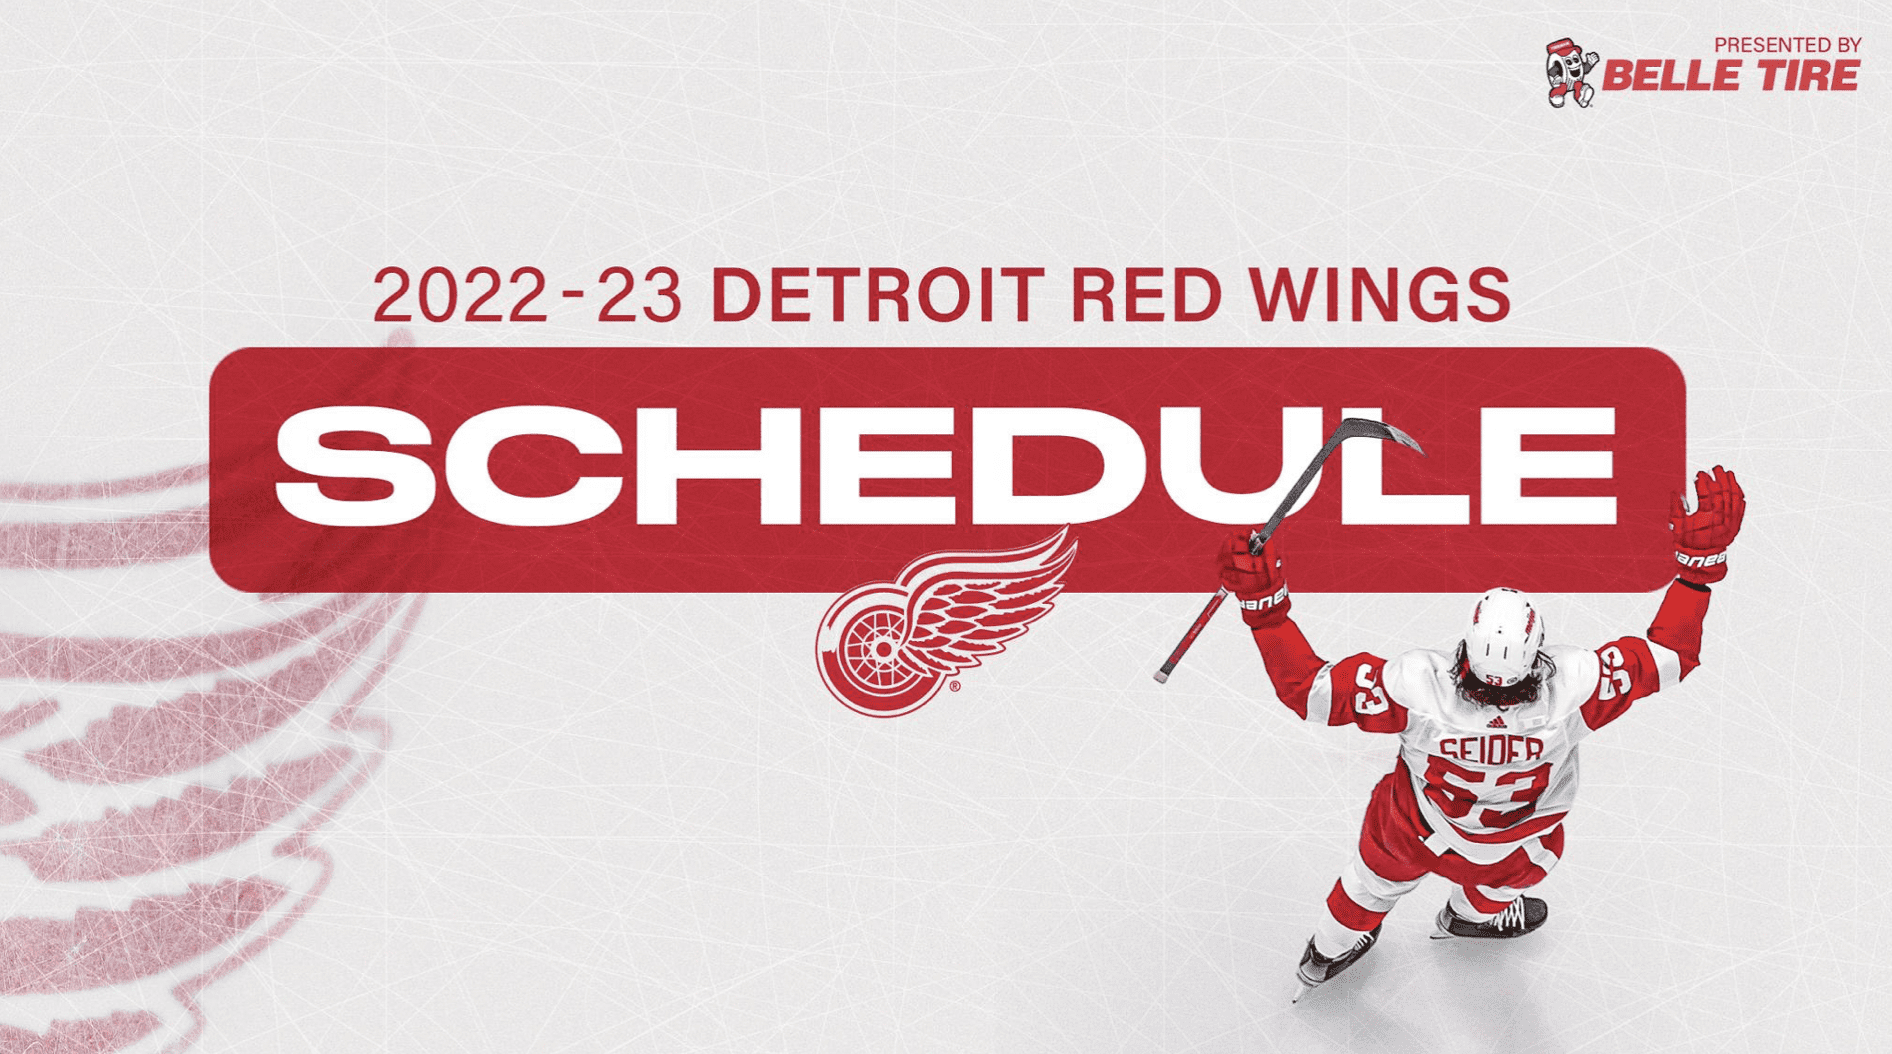 Detroit Red Wings: Closing the curtains on the 2022-23 season